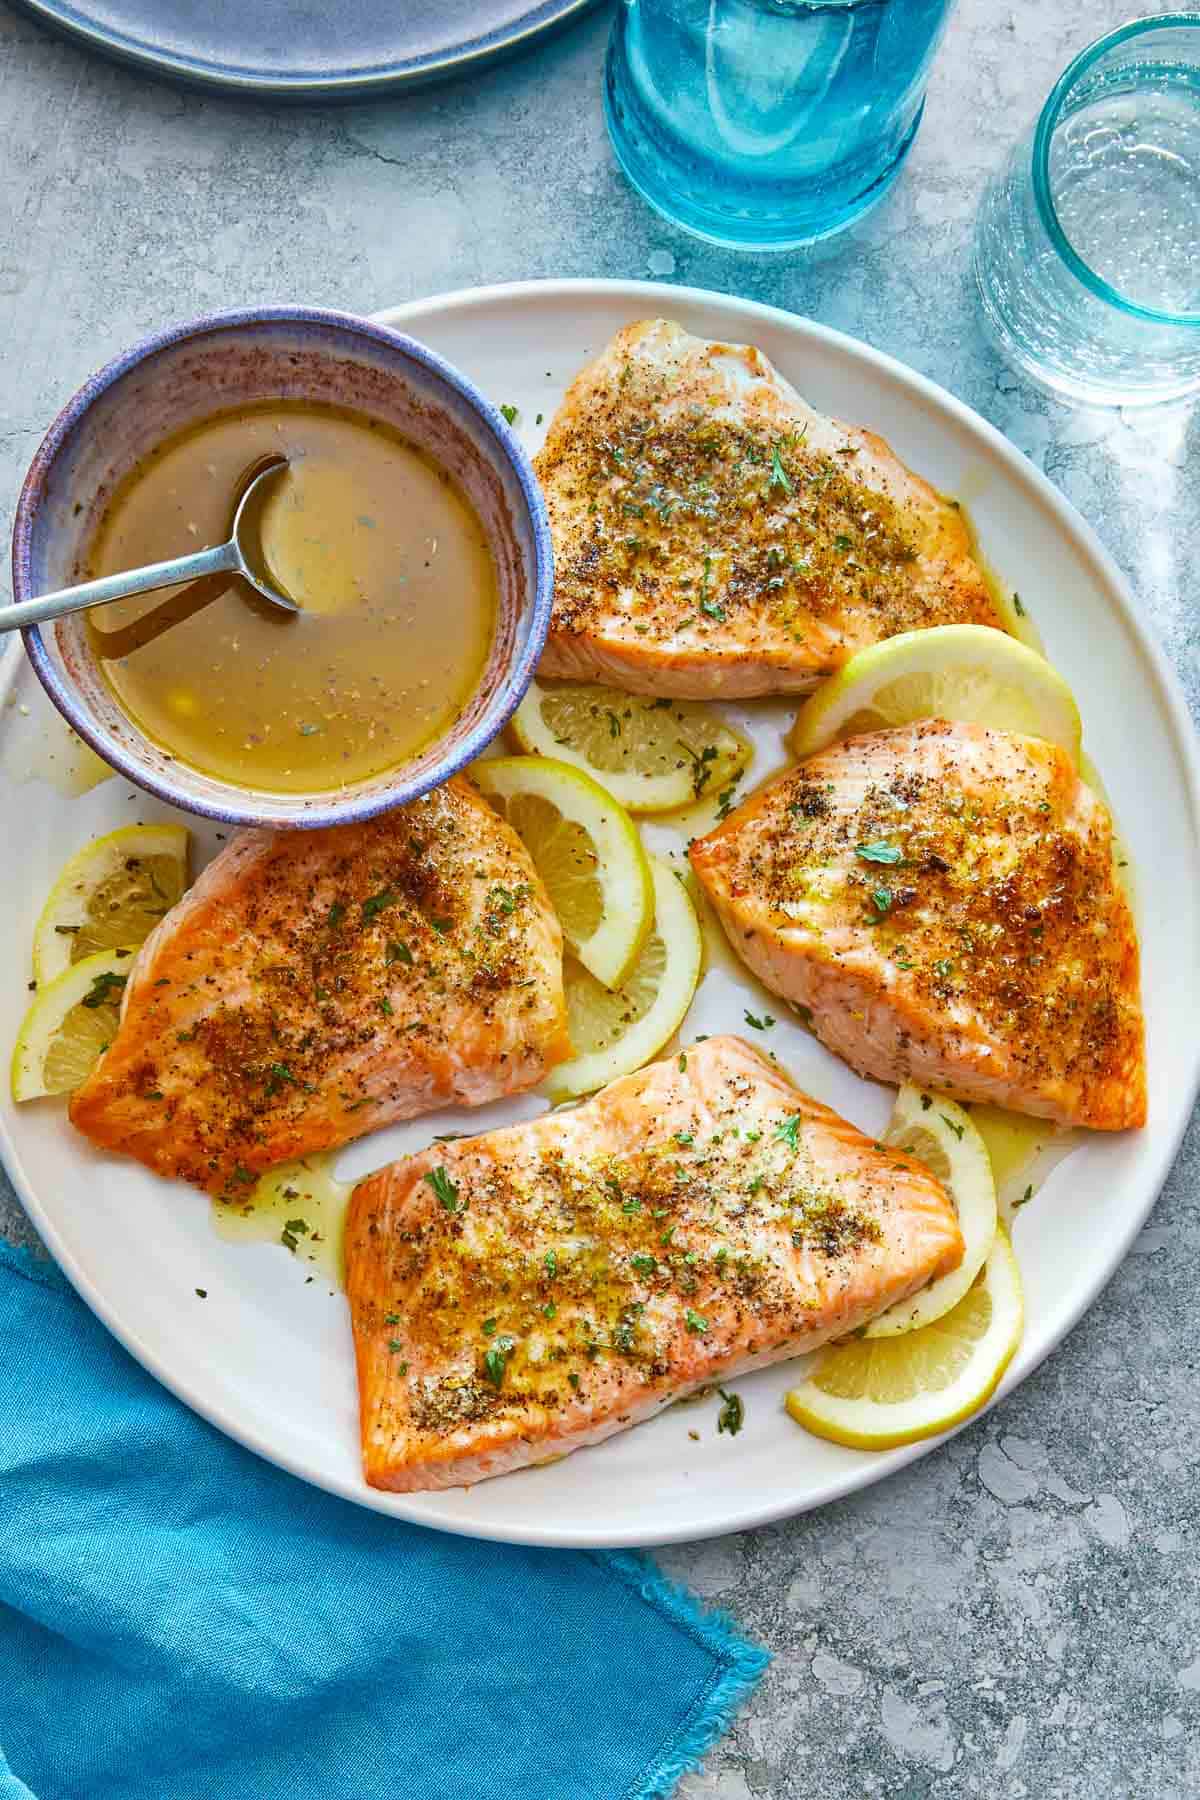 four broiled salmon fillets on a plate with lemon slices and a bowl of greek ladolemono dressing with a spoon.